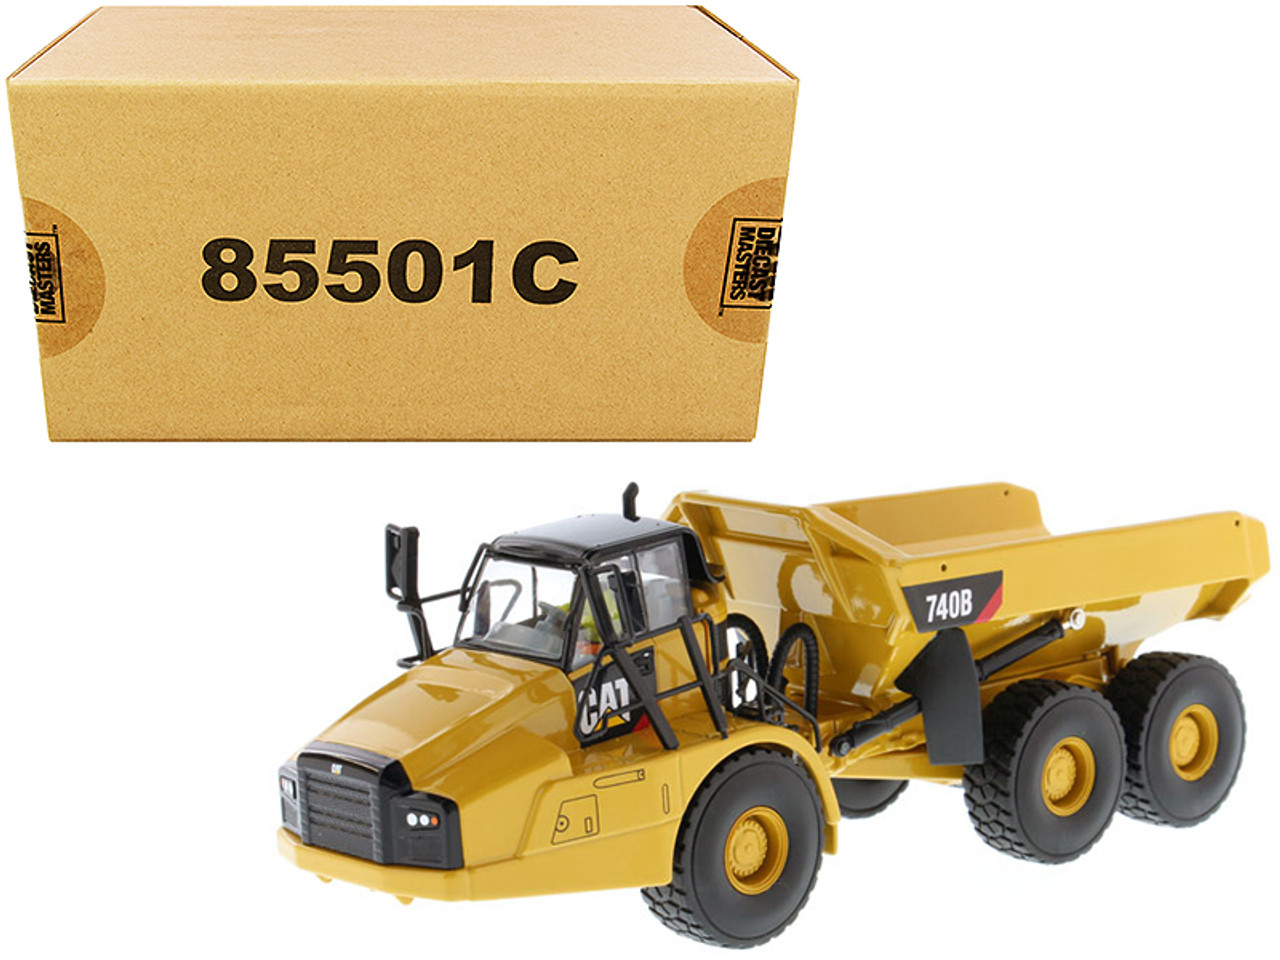 CAT Caterpillar 740B Articulated Hauler / Dump Truck with Tipper Body and Operator "Core Classics Series" 1/50 Diecast Model by Diecast Masters